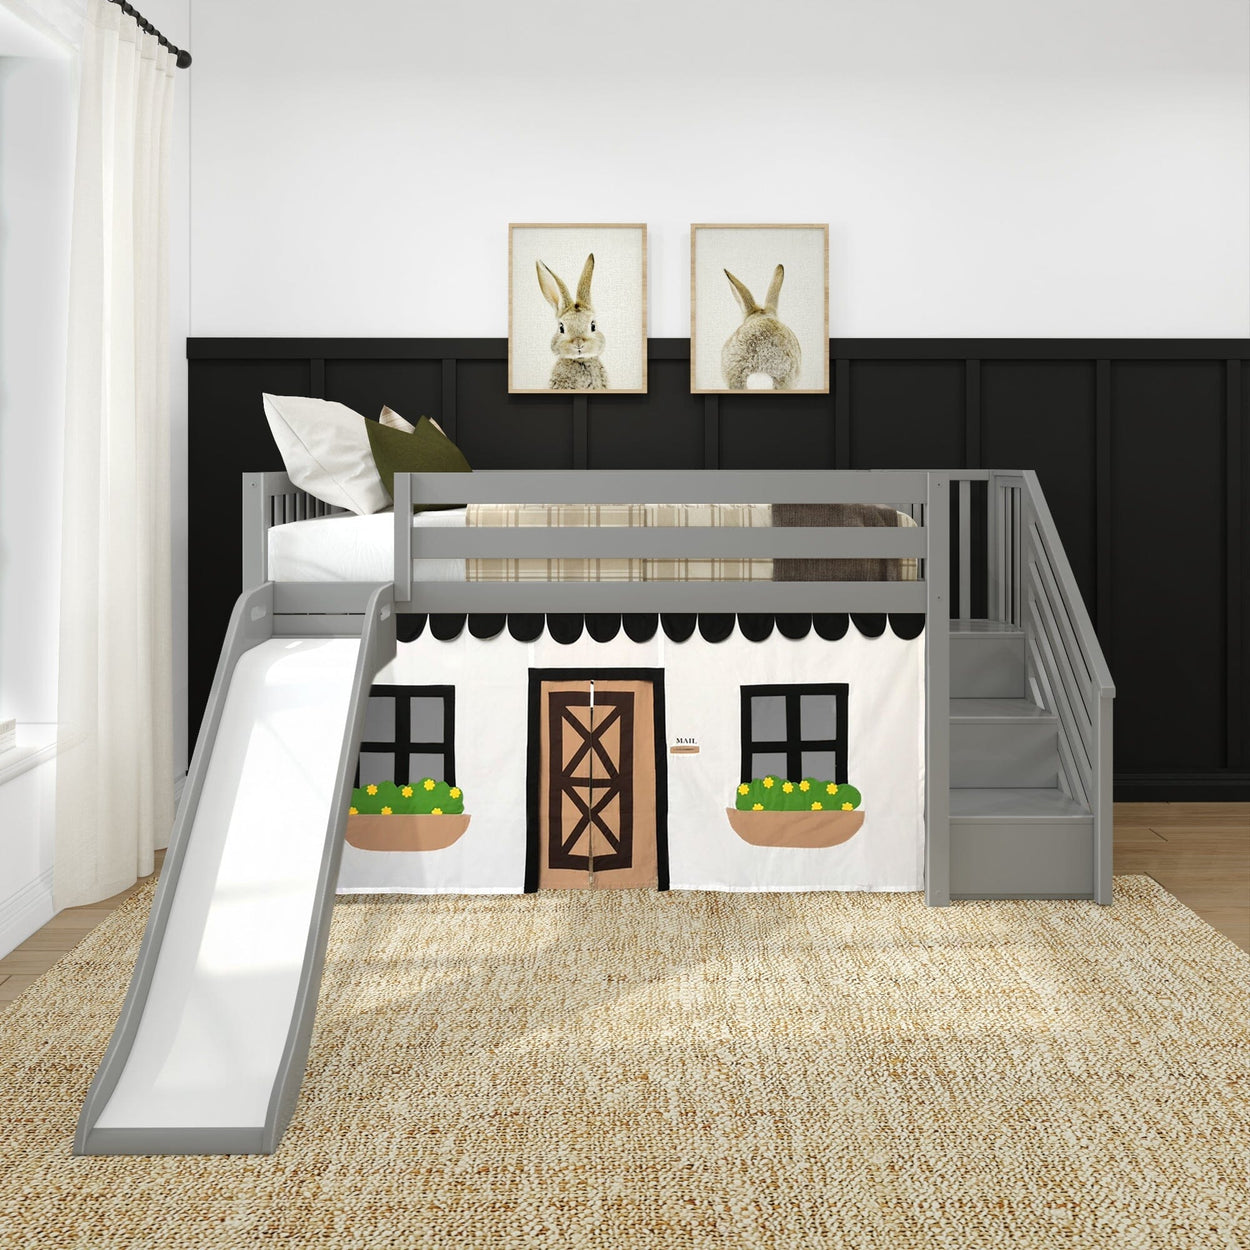 180425121069 : Loft Beds Low Loft with Stairs, Easy Slide and Black and White Farmhouse Curtain, Grey